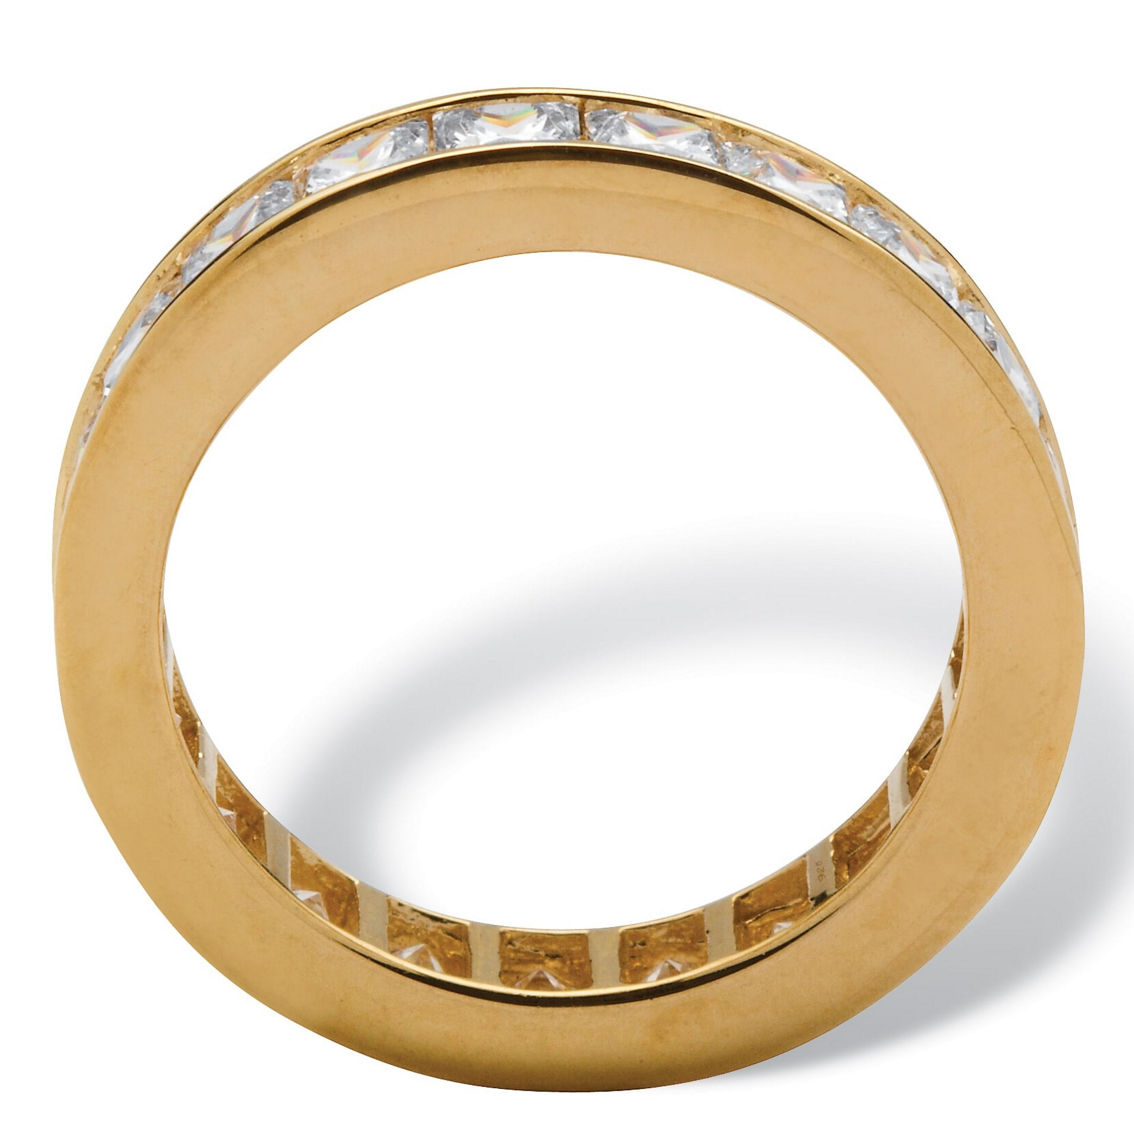 PalmBeach 5.29 TCW Princess-Cut Cubic Zirconia 18k Gold-plated Silver Eternity Ring - Image 2 of 5